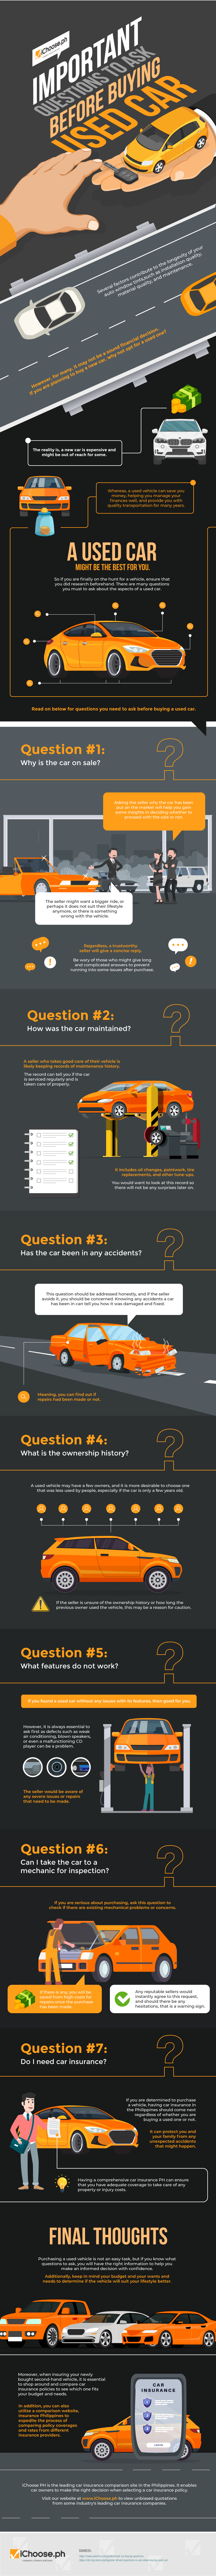 Important-Questions-to-Ask-Before-Buying-a-Used-Car-Infographic